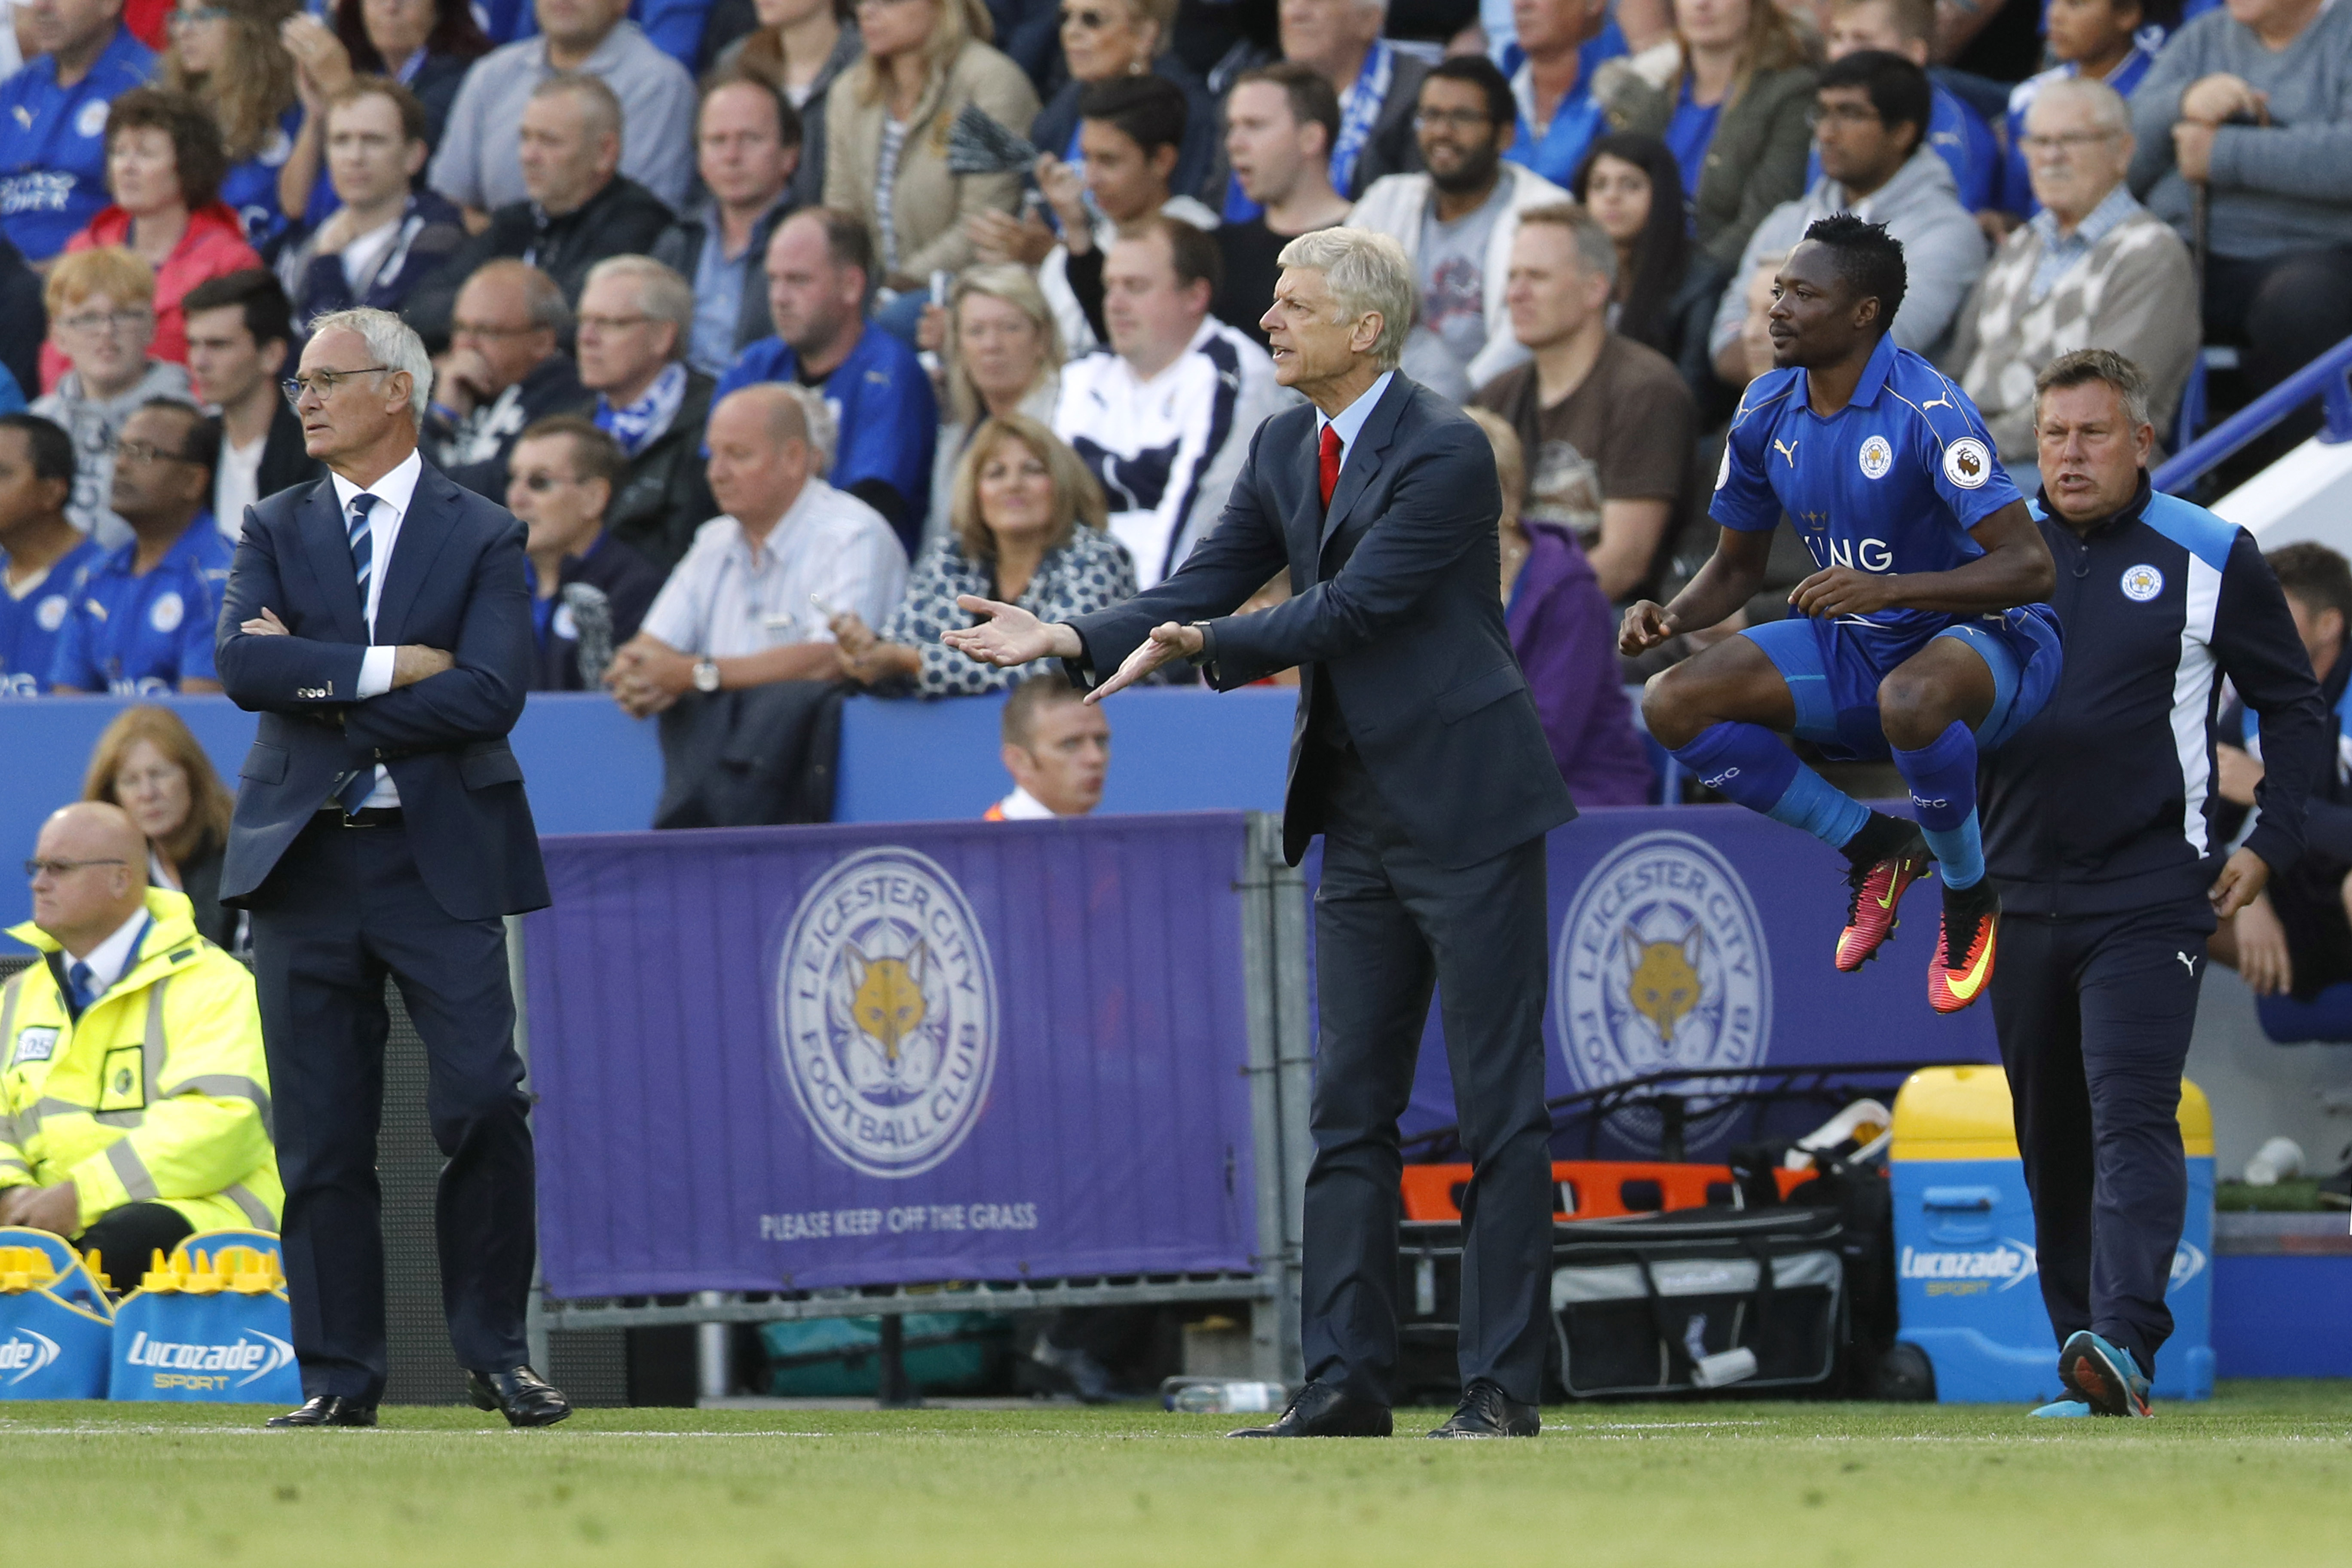 Britain Soccer Football - Leicester City v Arsenal - Premier League - King Power Stadium - 20/8/16 Leicester City's Ahmed Musa waits to come on as a substitute as Arsenal manager Arsene Wenger and Leicester City manager Claudio Ranieri look on Reuters / Darren Staples Livepic EDITORIAL USE ONLY. No use with unauthorized audio, video, data, fixture lists, club/league logos or 